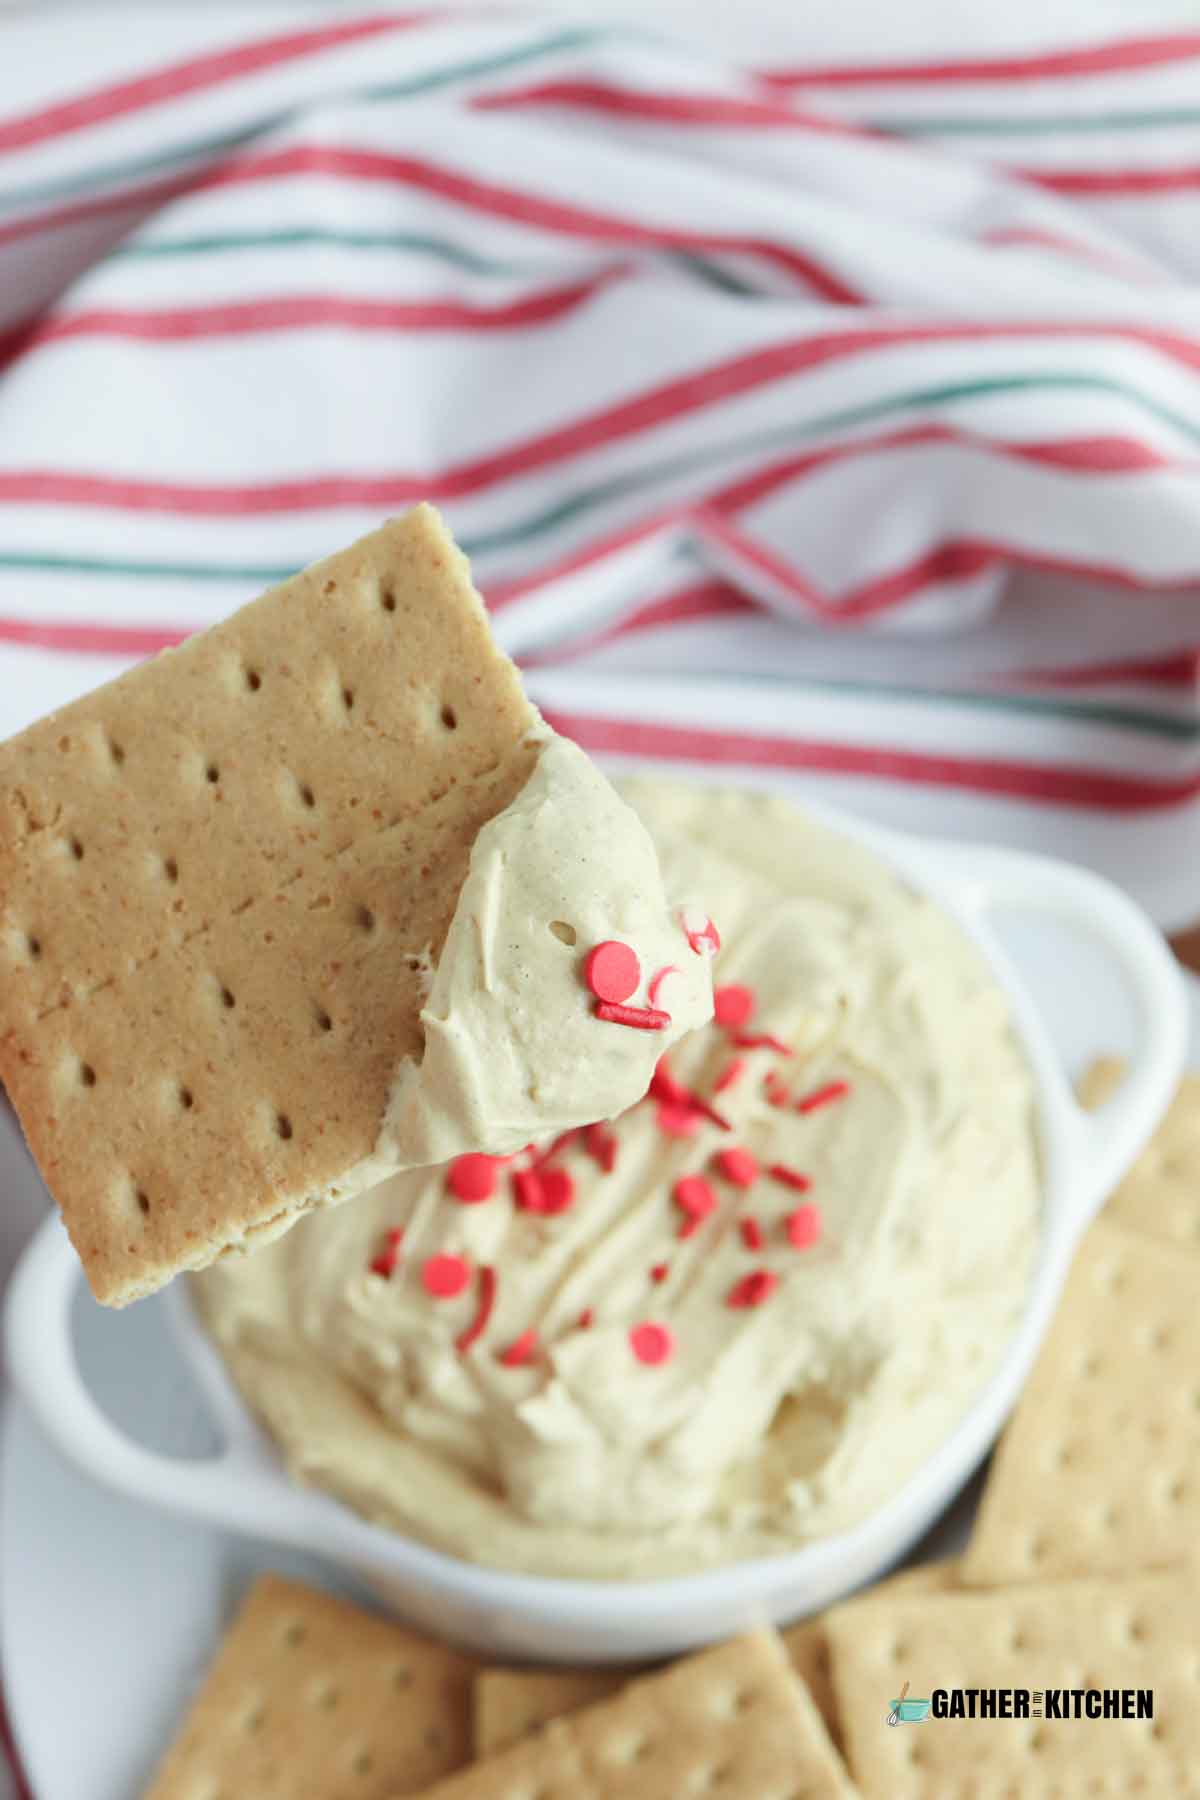 Graham cracker with gingerbread dip on it.